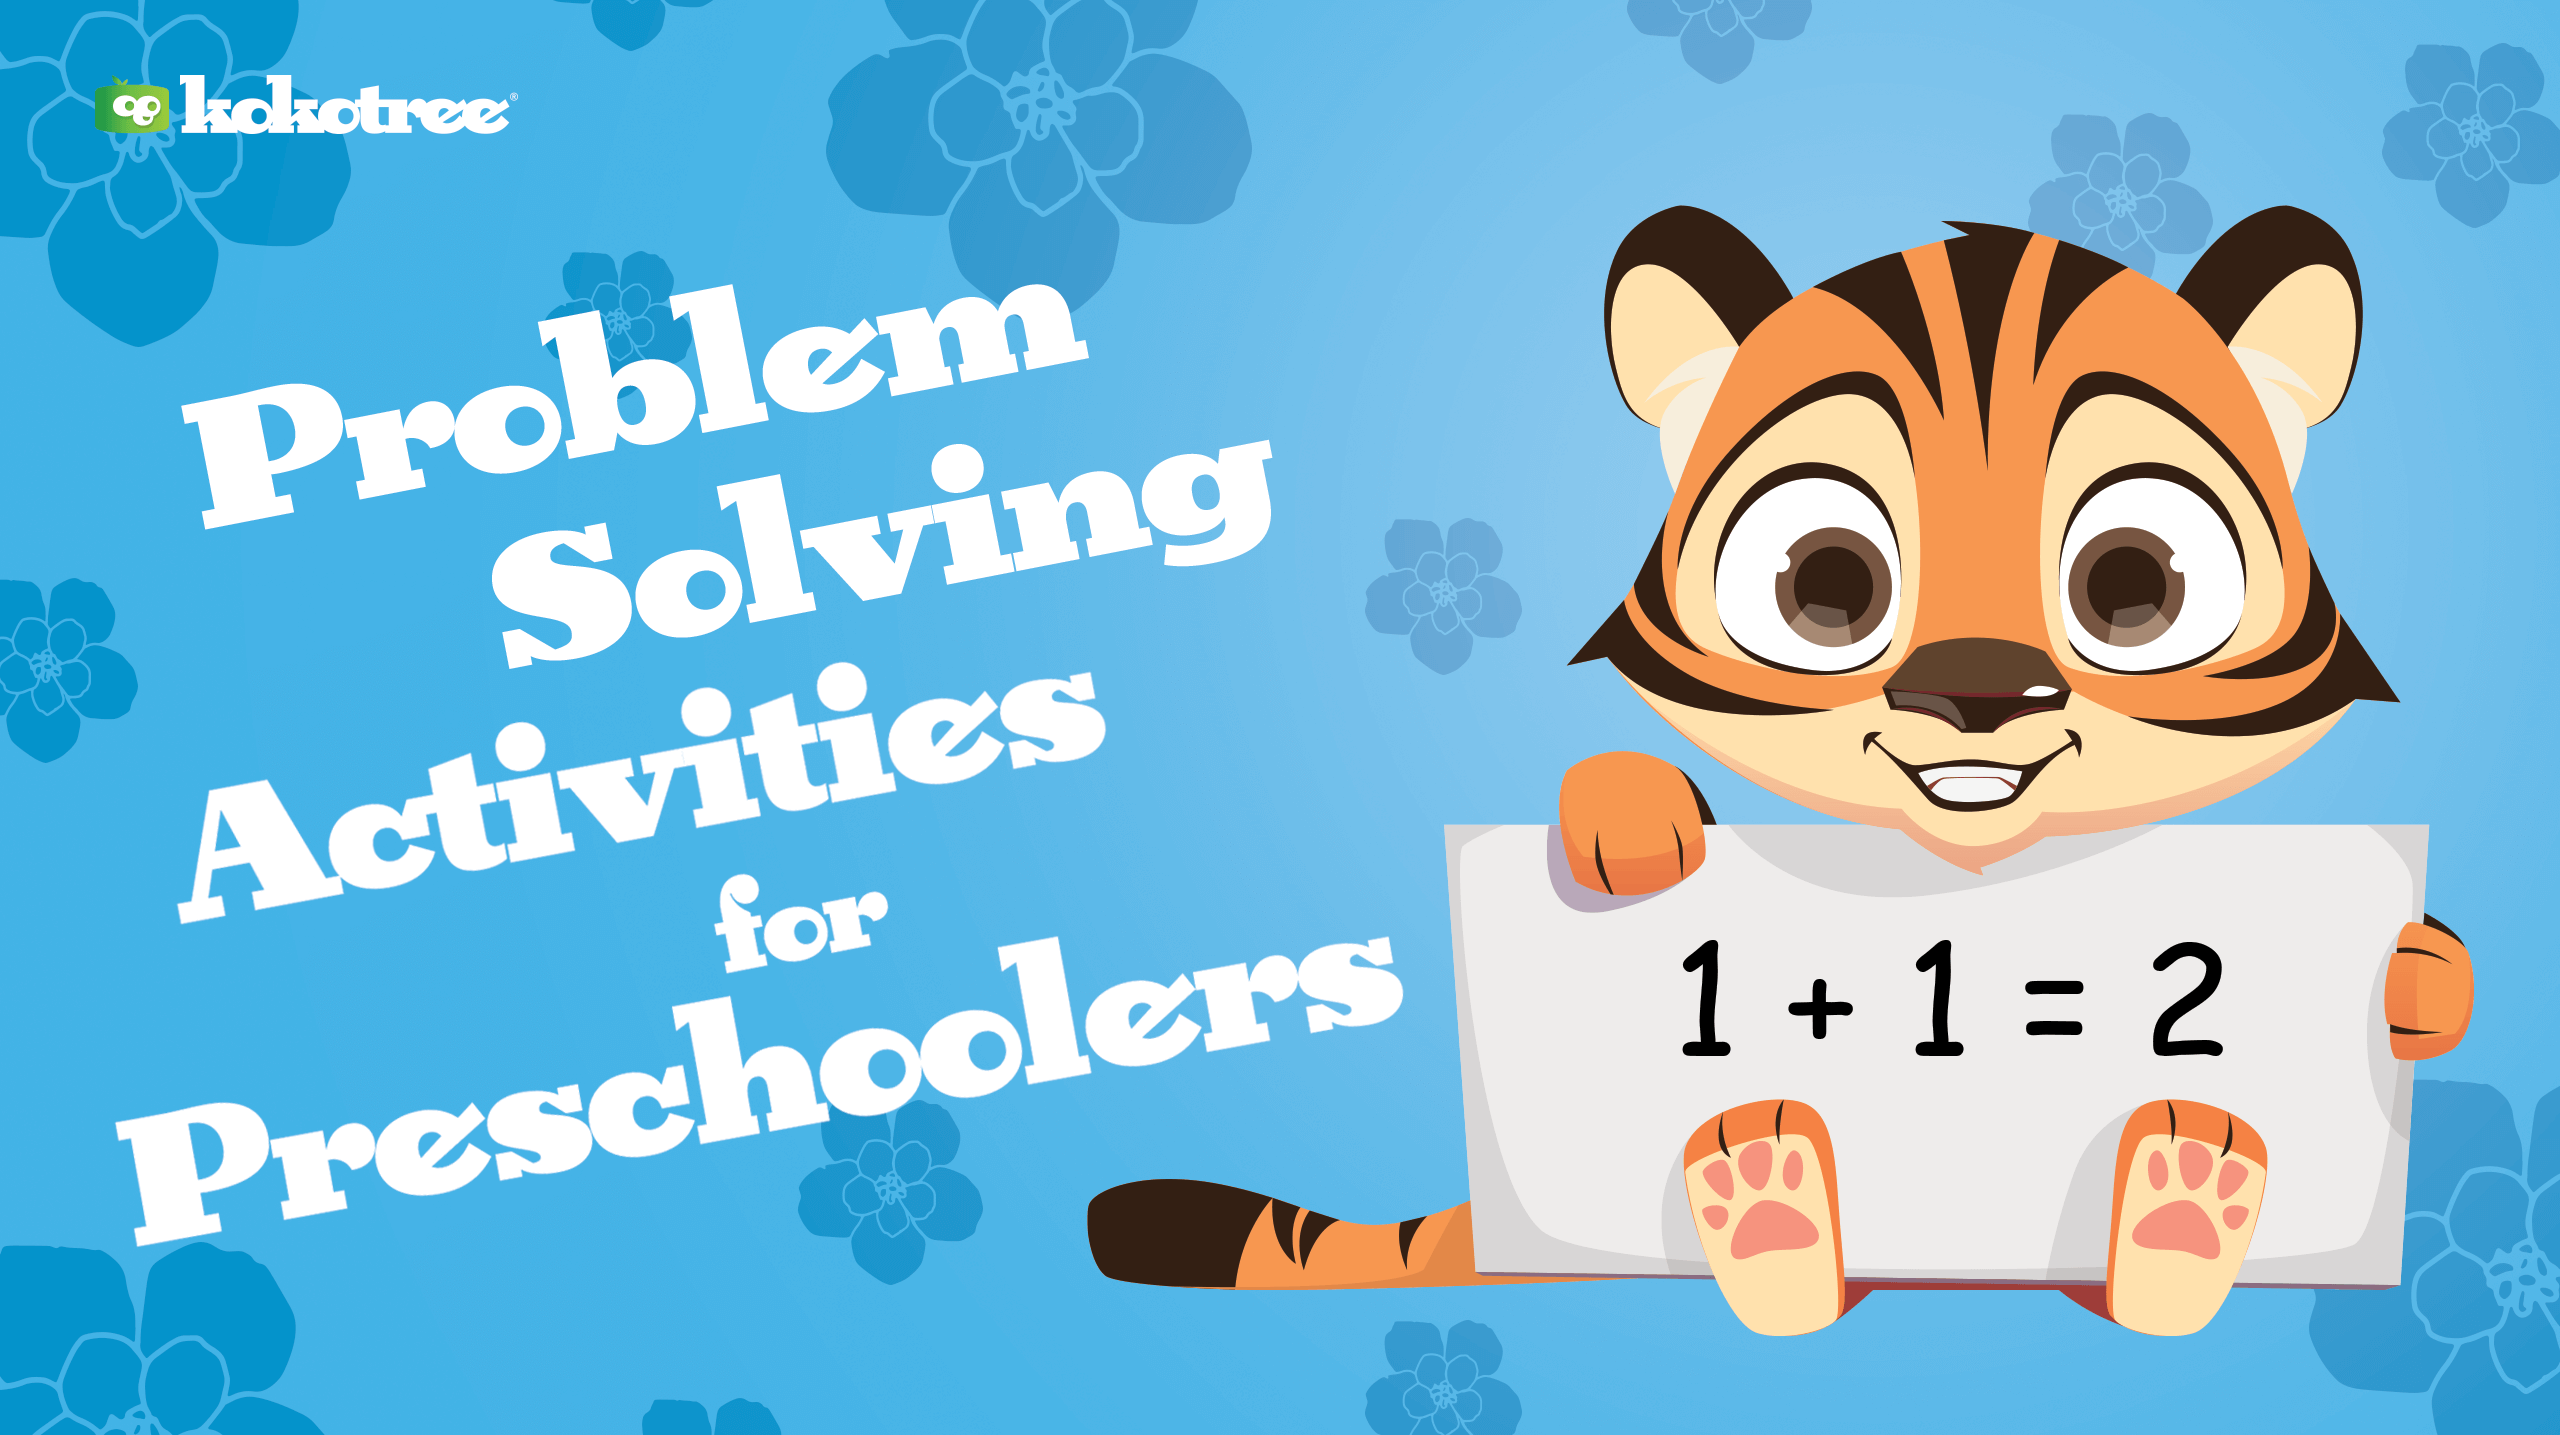 activities that promote problem solving